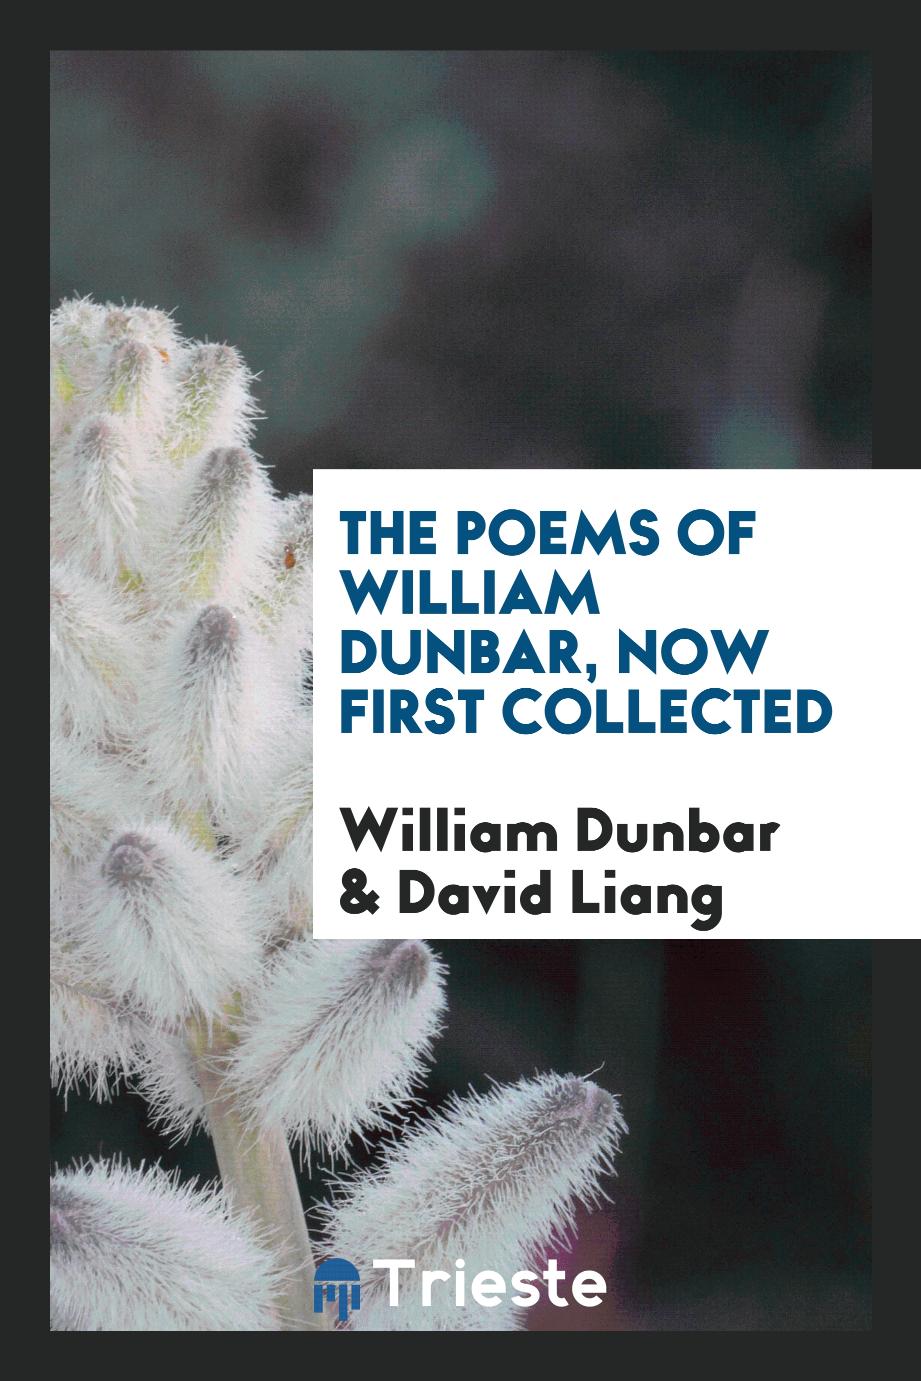 The poems of William Dunbar, now first collected